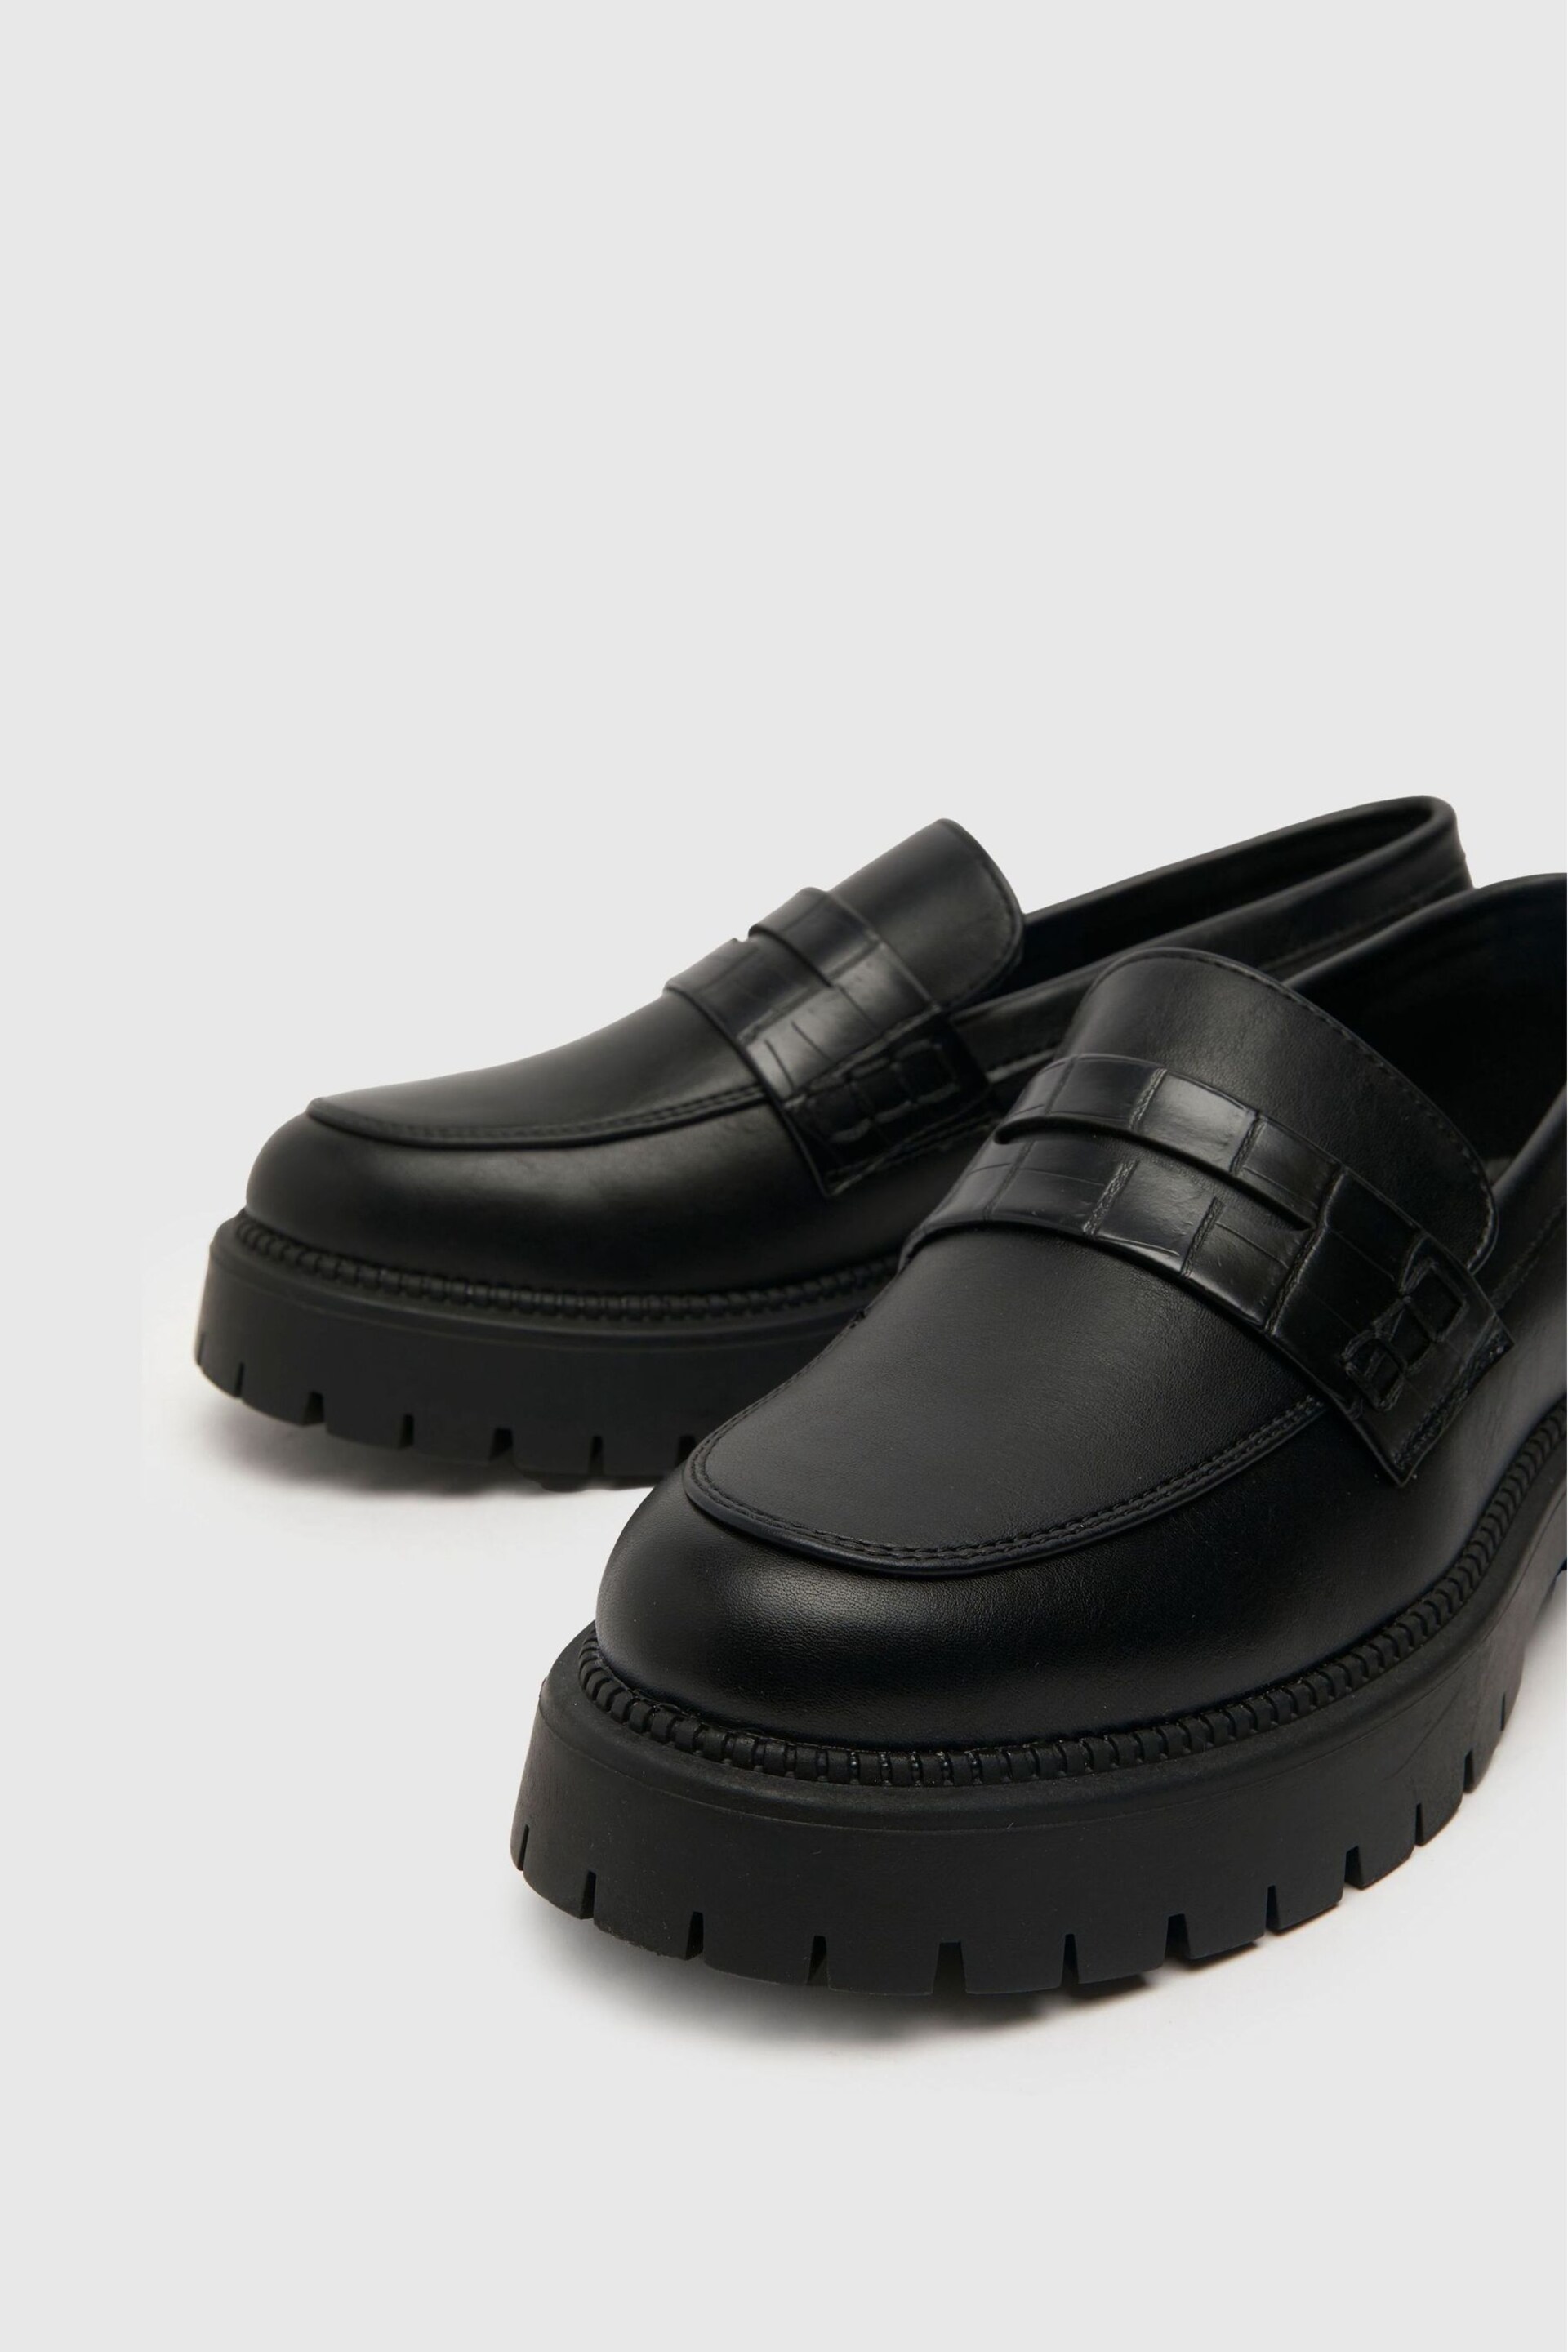 Schuh Leanna Chunky Loafers - Image 3 of 4